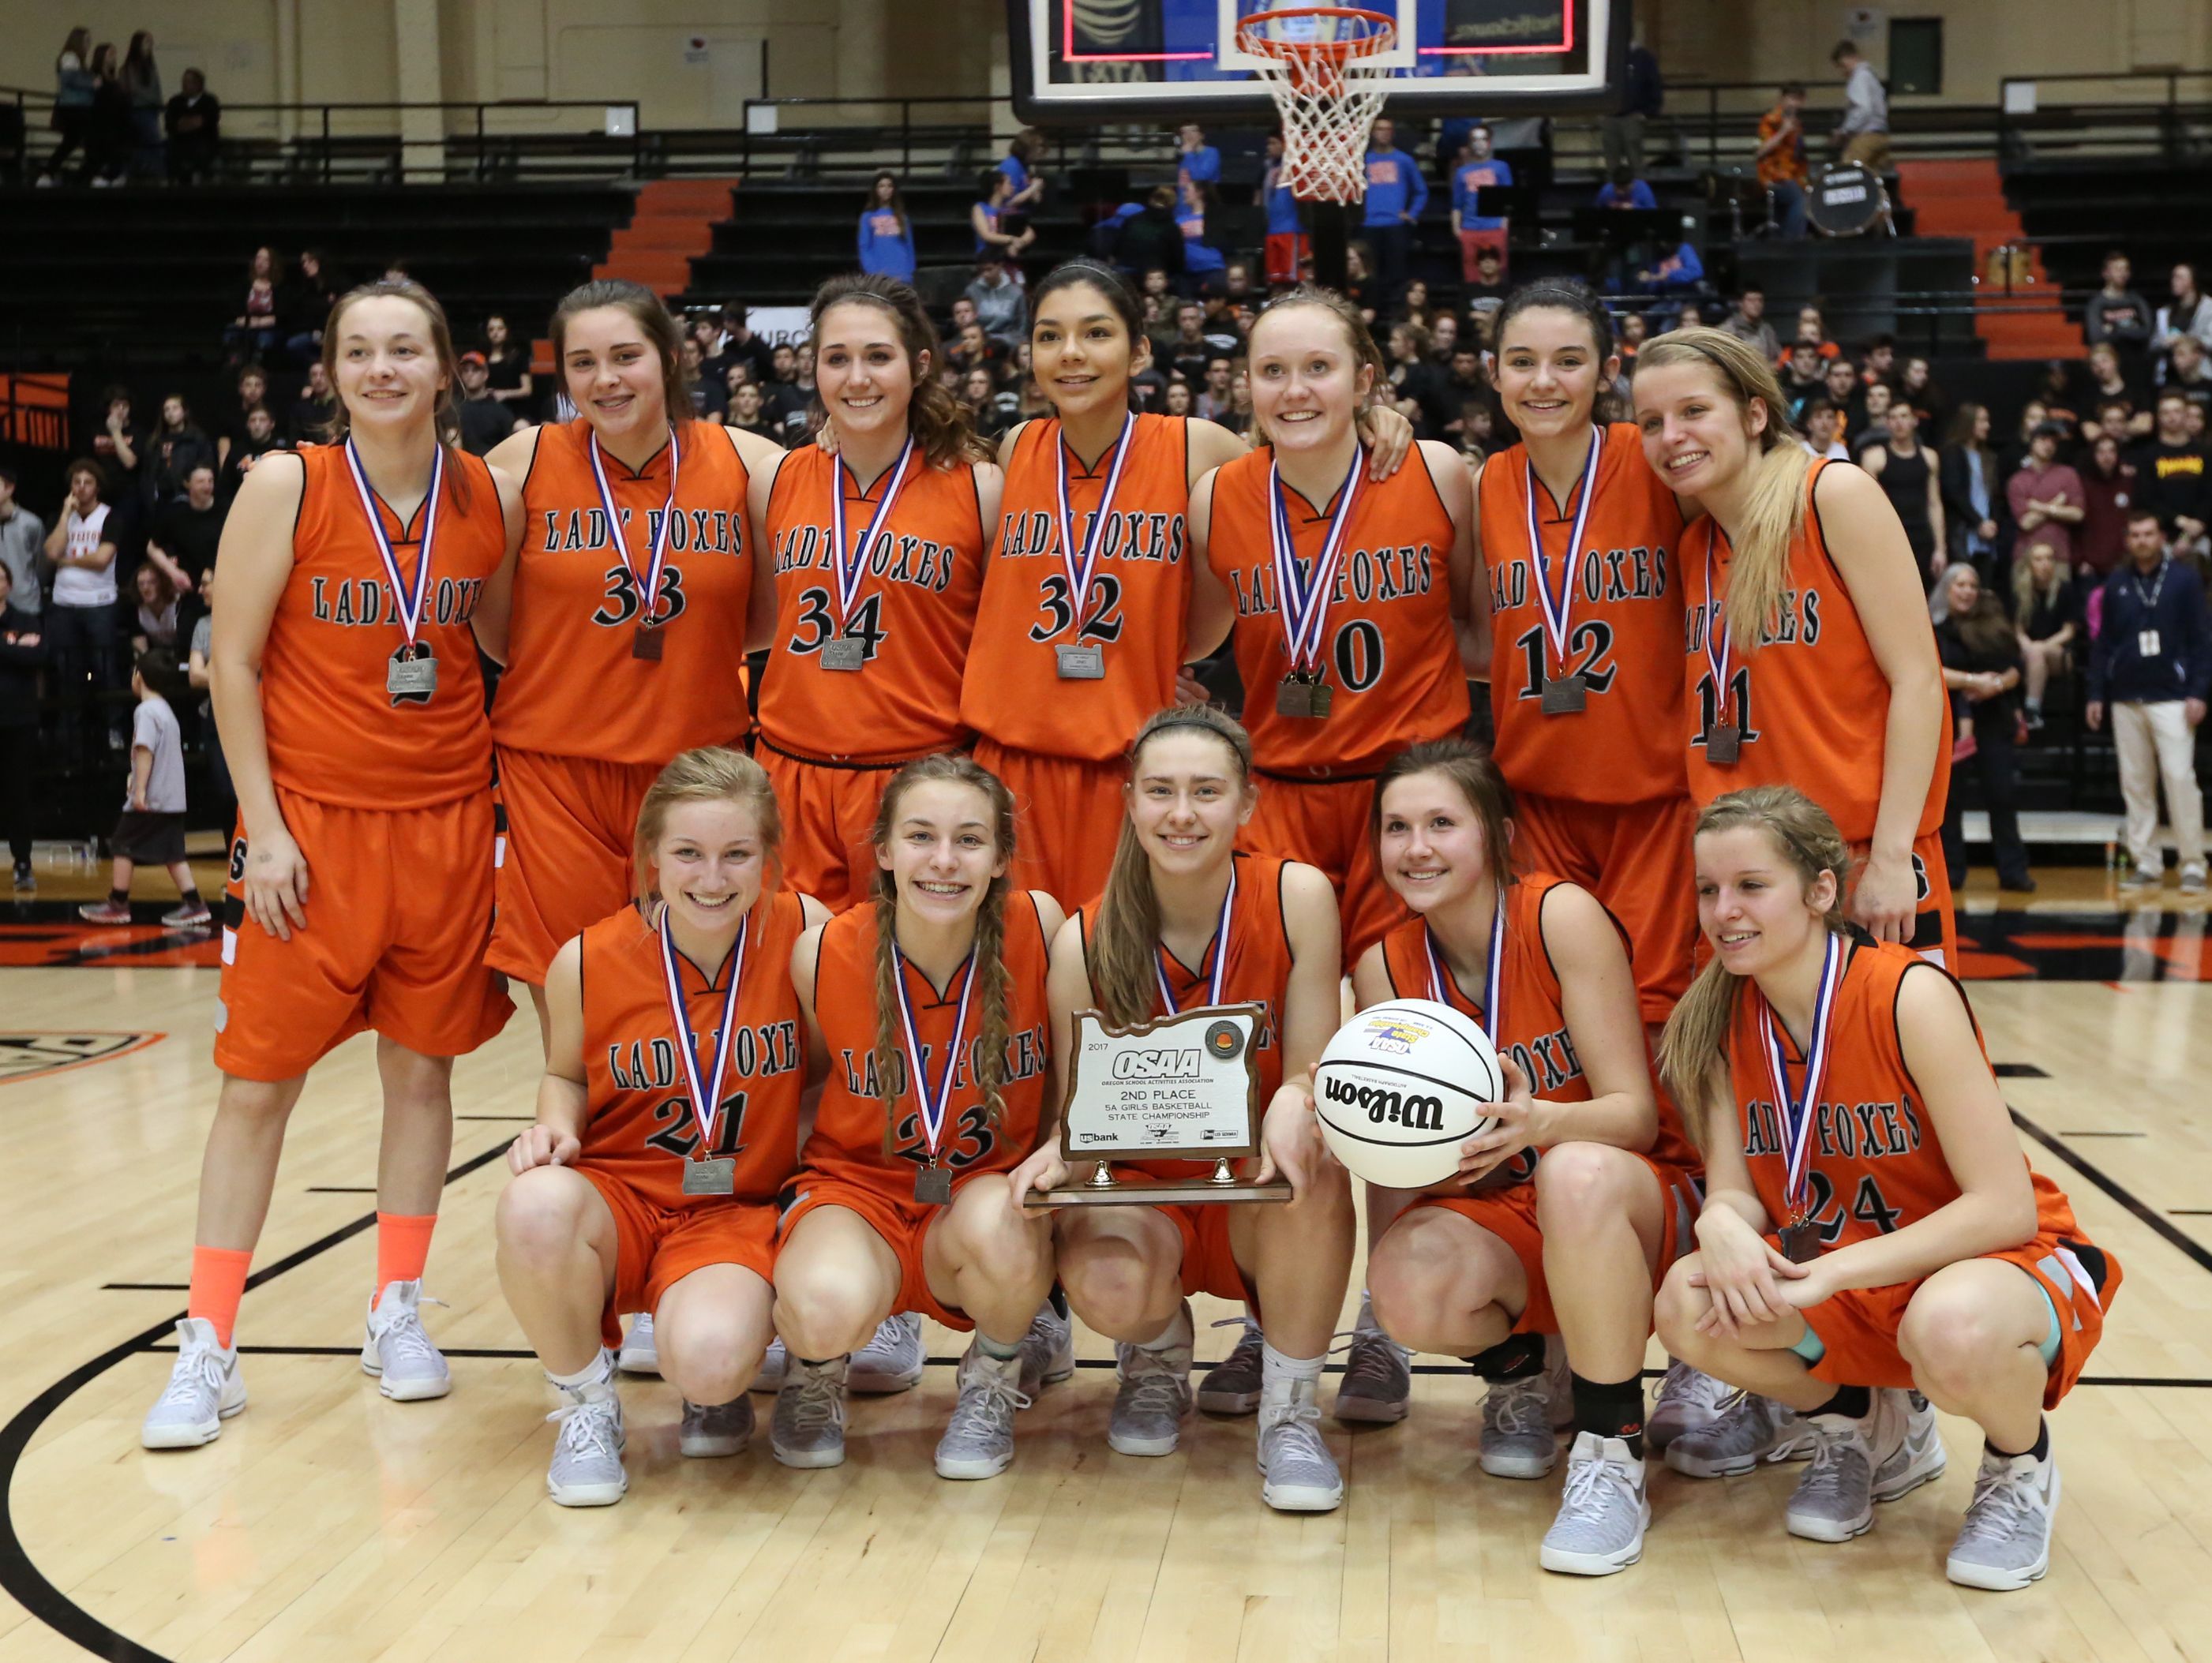 Silverton places second in the OSAA Class 5A state championship on Friday, March 10, 2017, at Gill Coliseum in Corvallis. LaSalle defeated the Foxes 42-28.